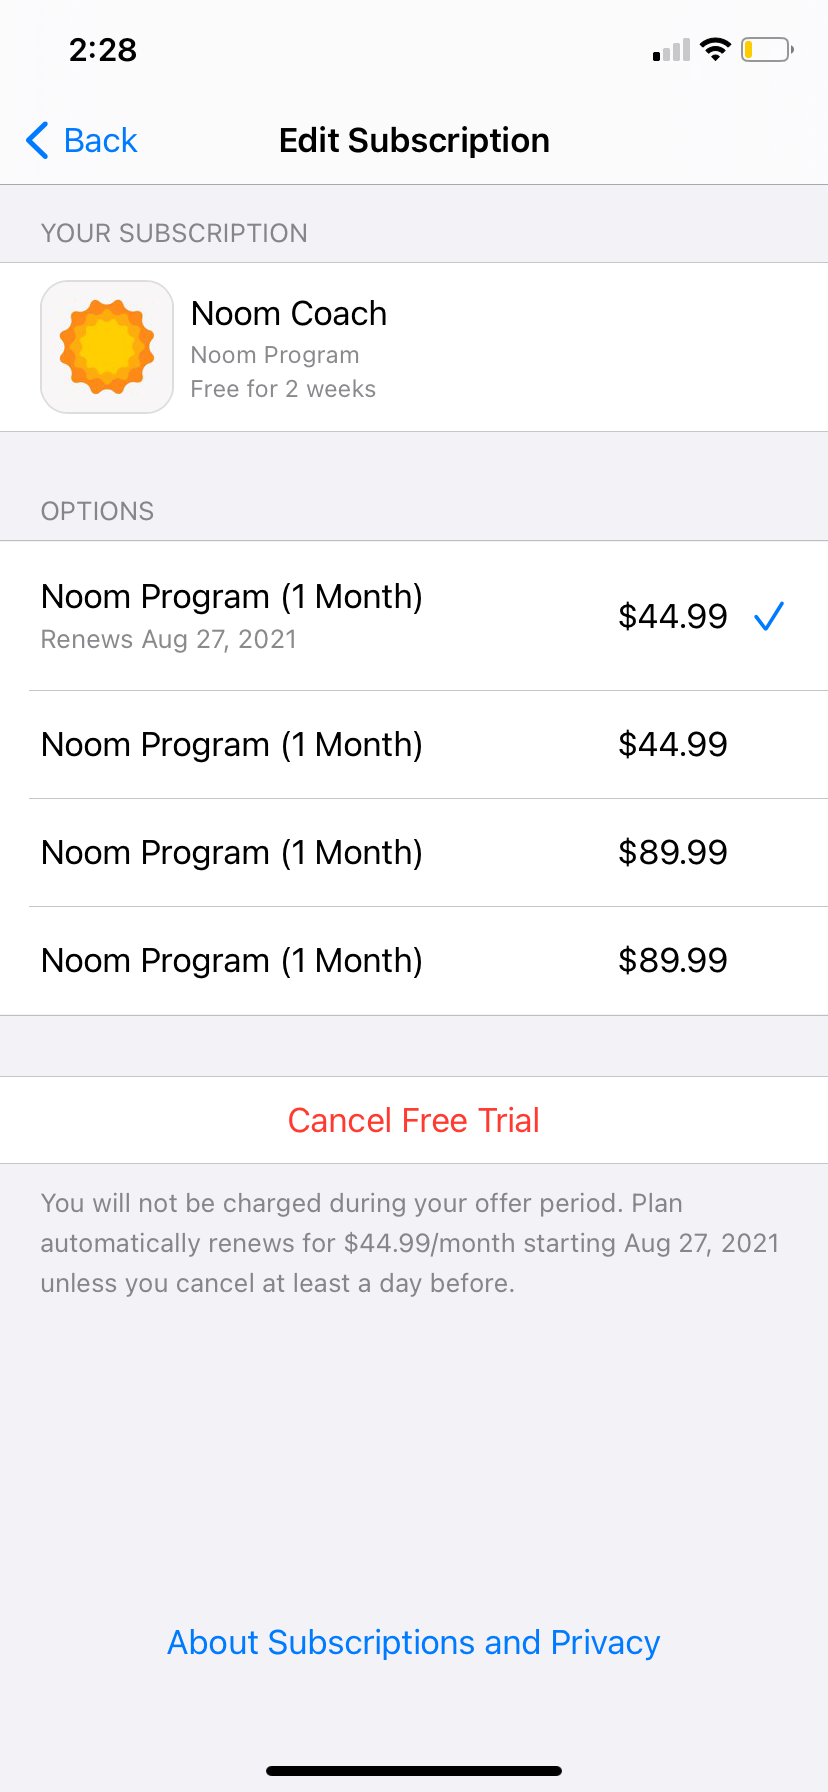 Noom app subscription open in iPhone Settings, with Cancel Free Trial button visible